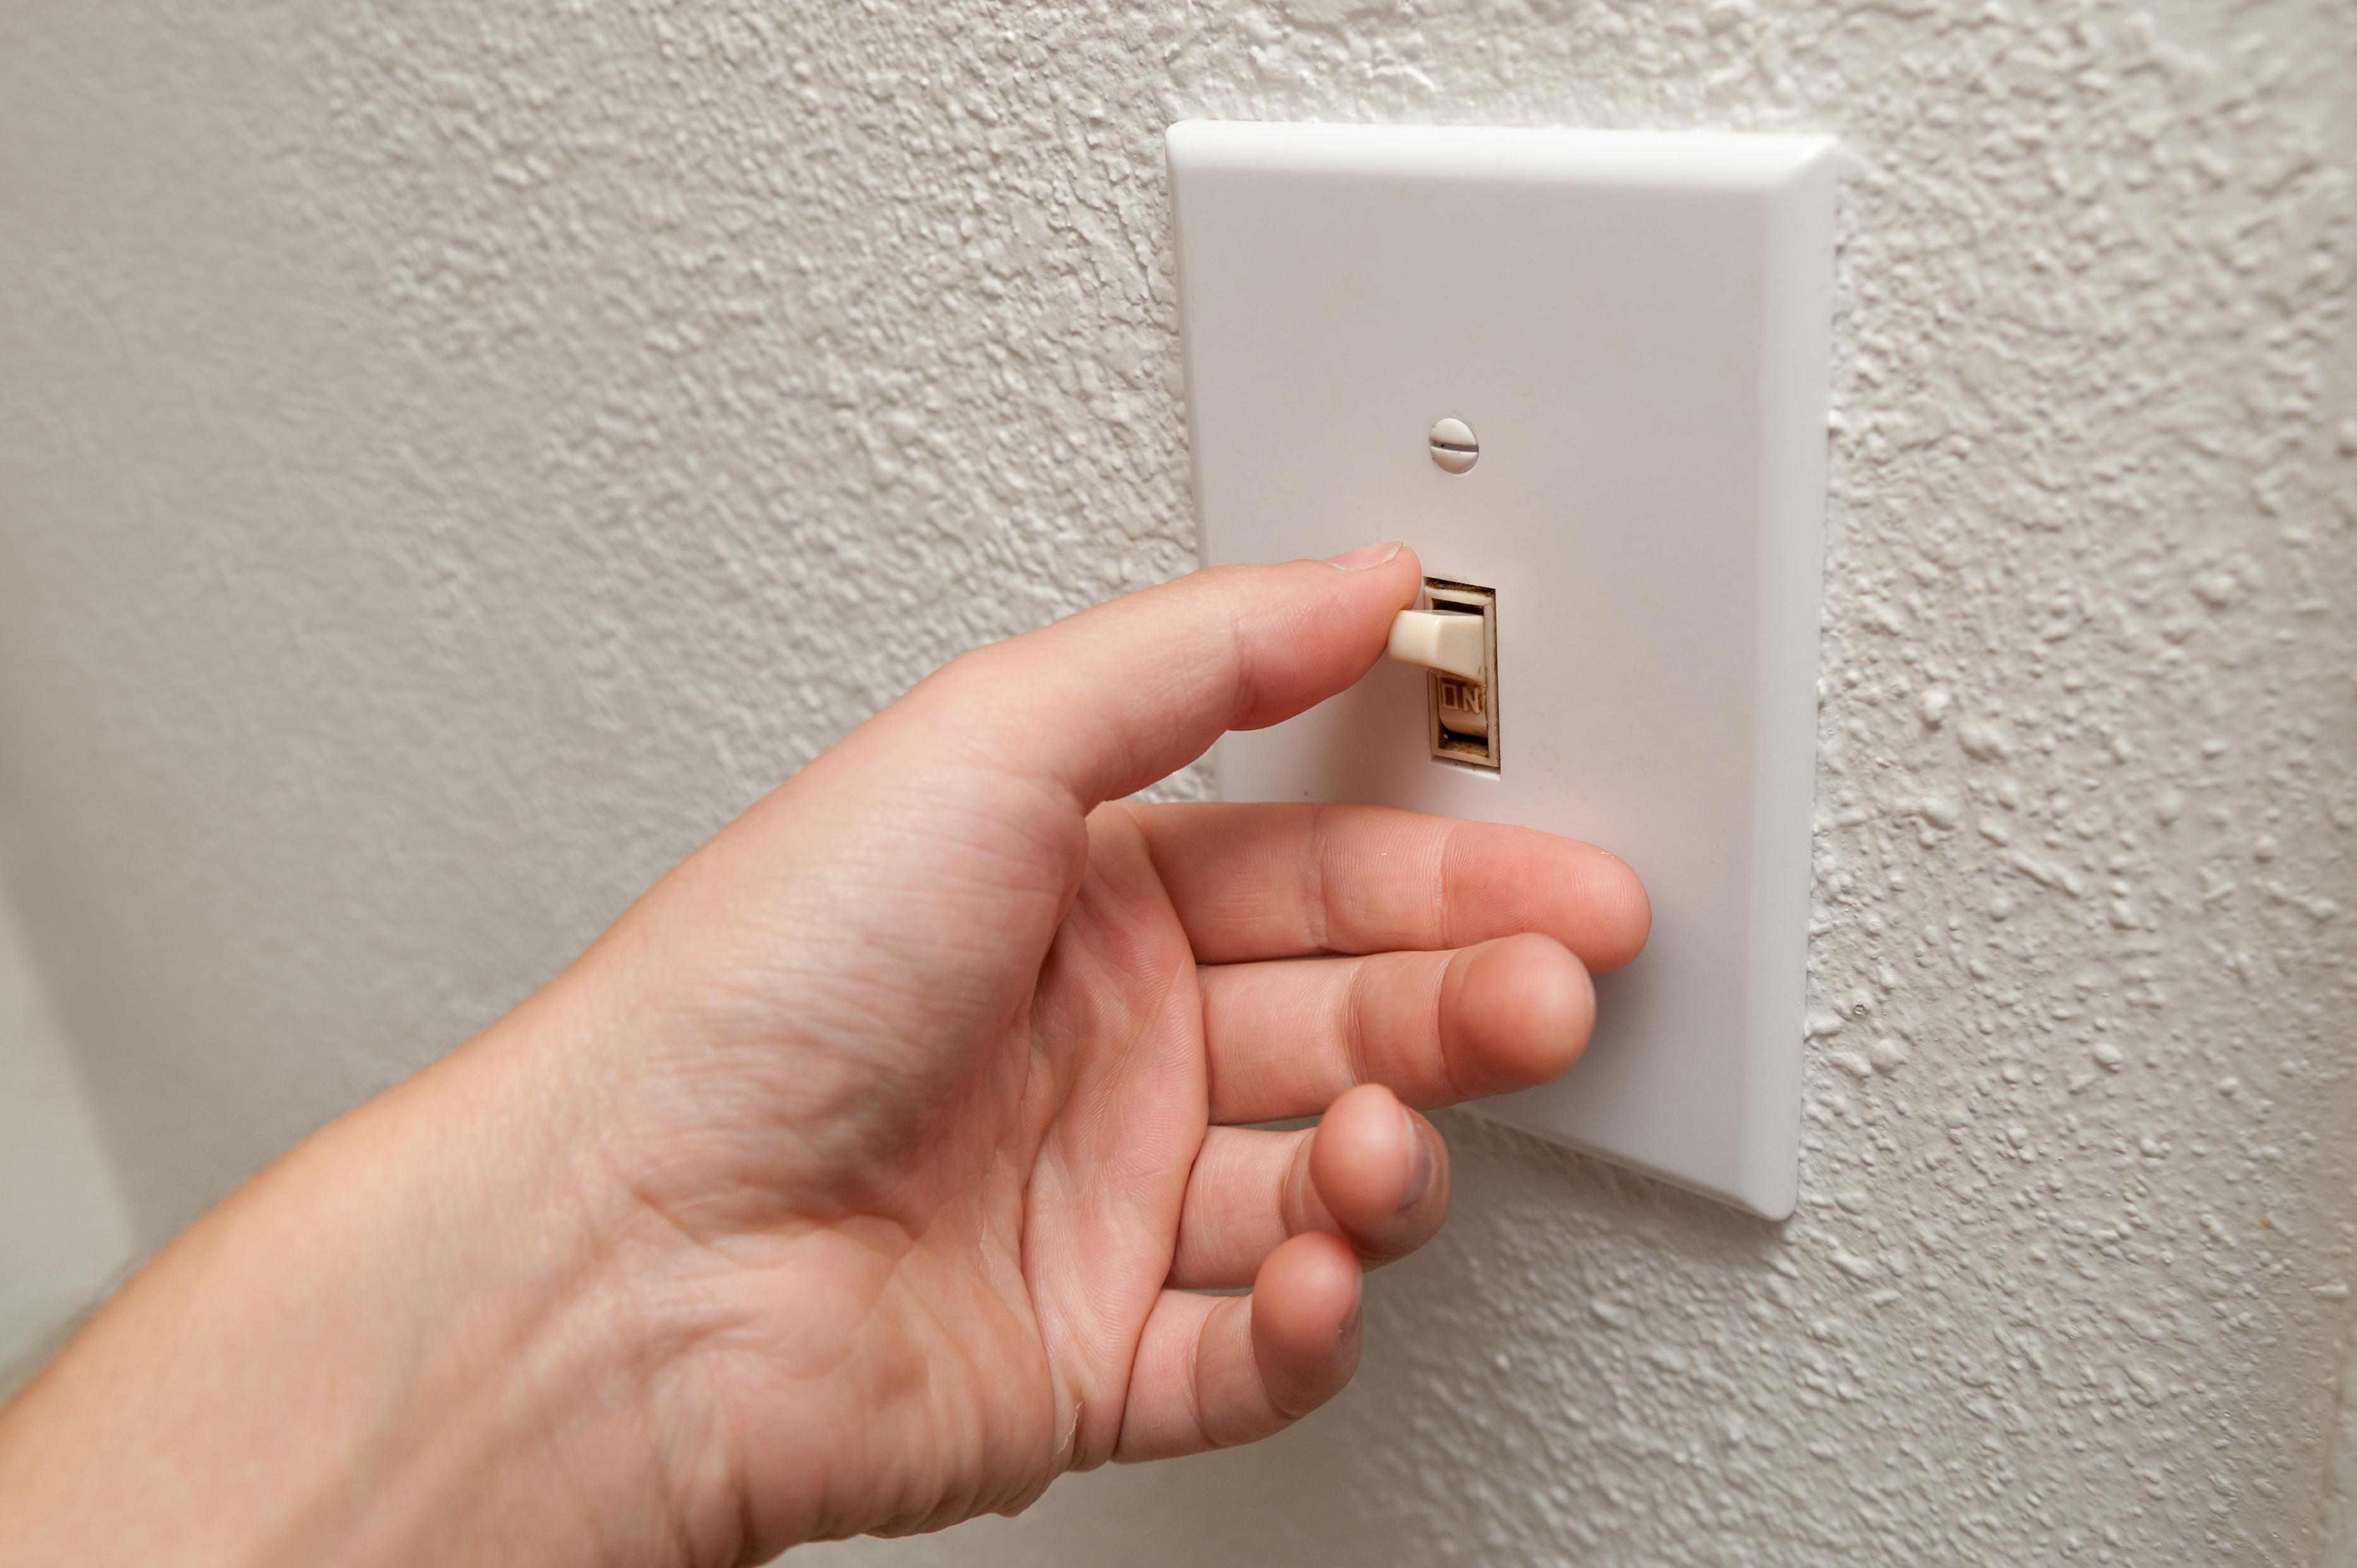 Flipping a light switch